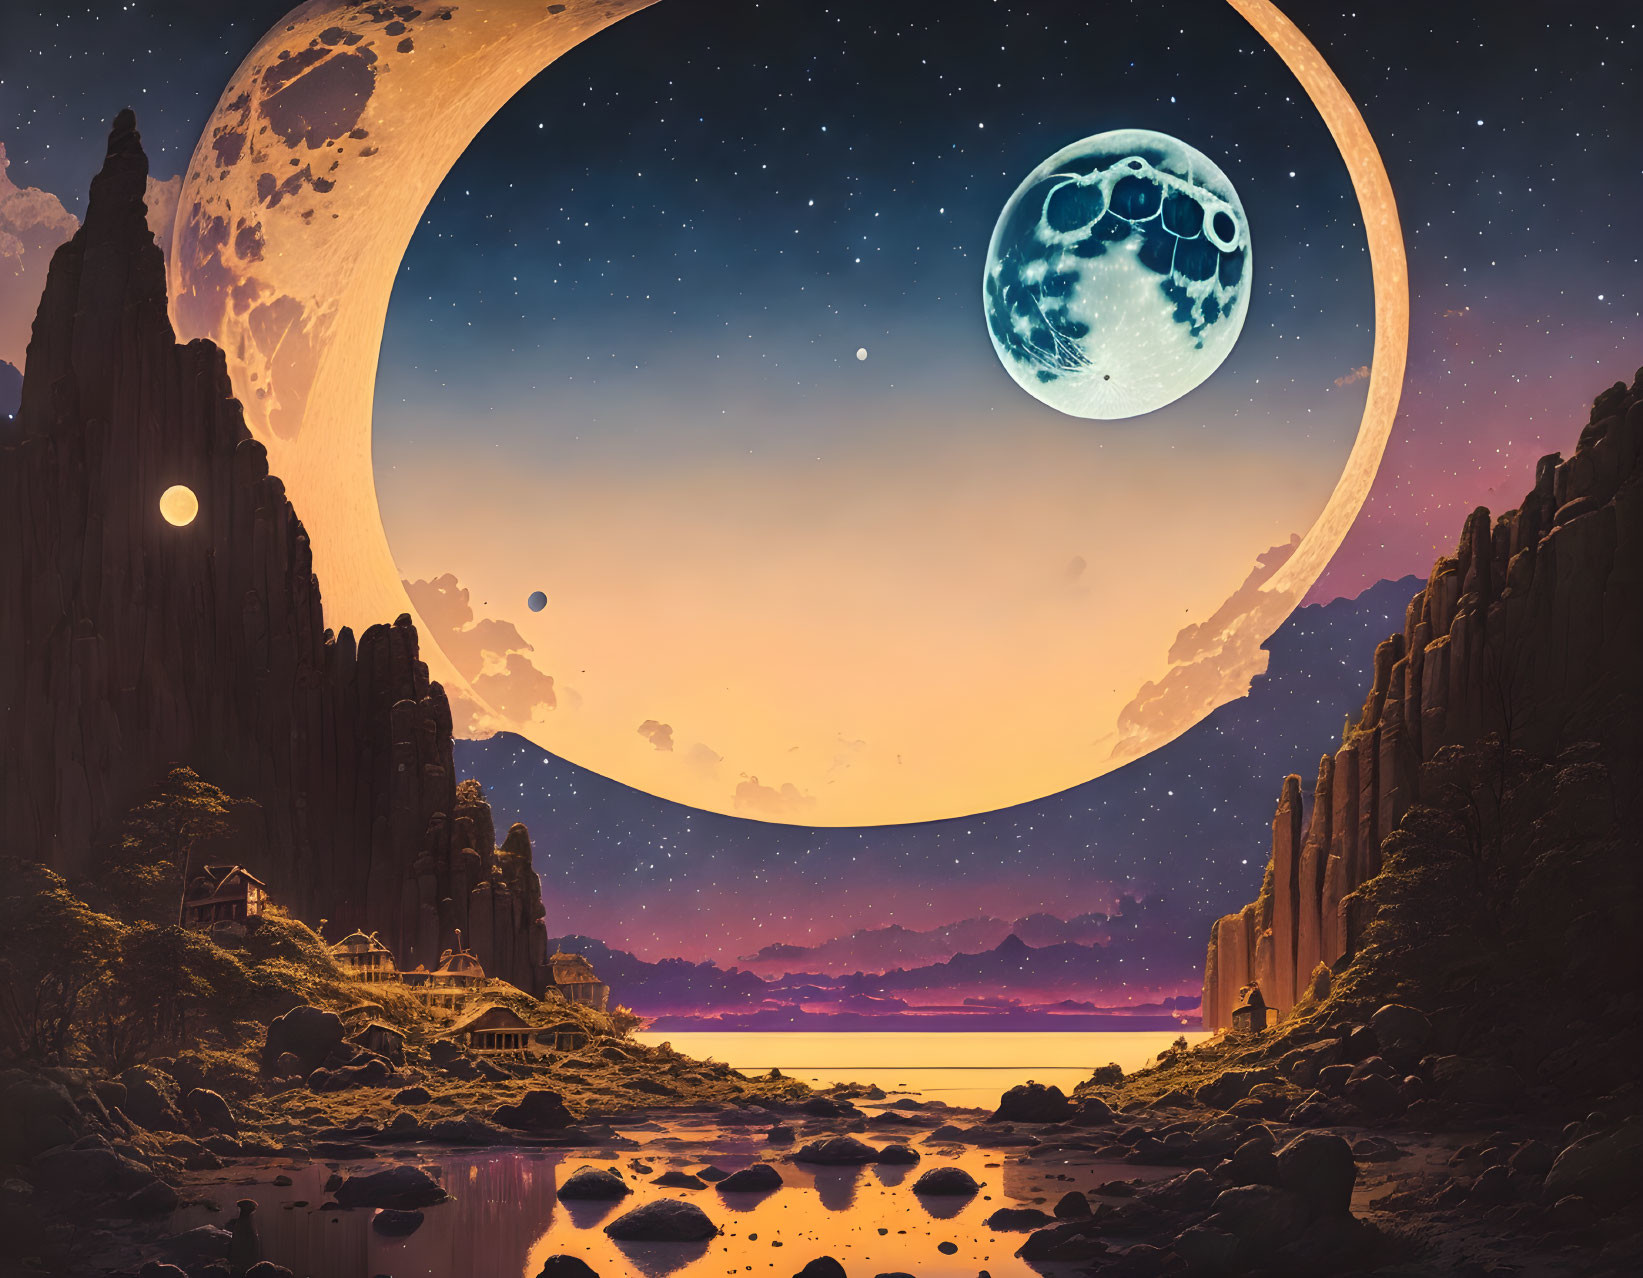 Fantastical landscape with moon, planet, rocky terrain, house on stilts, and sunset.